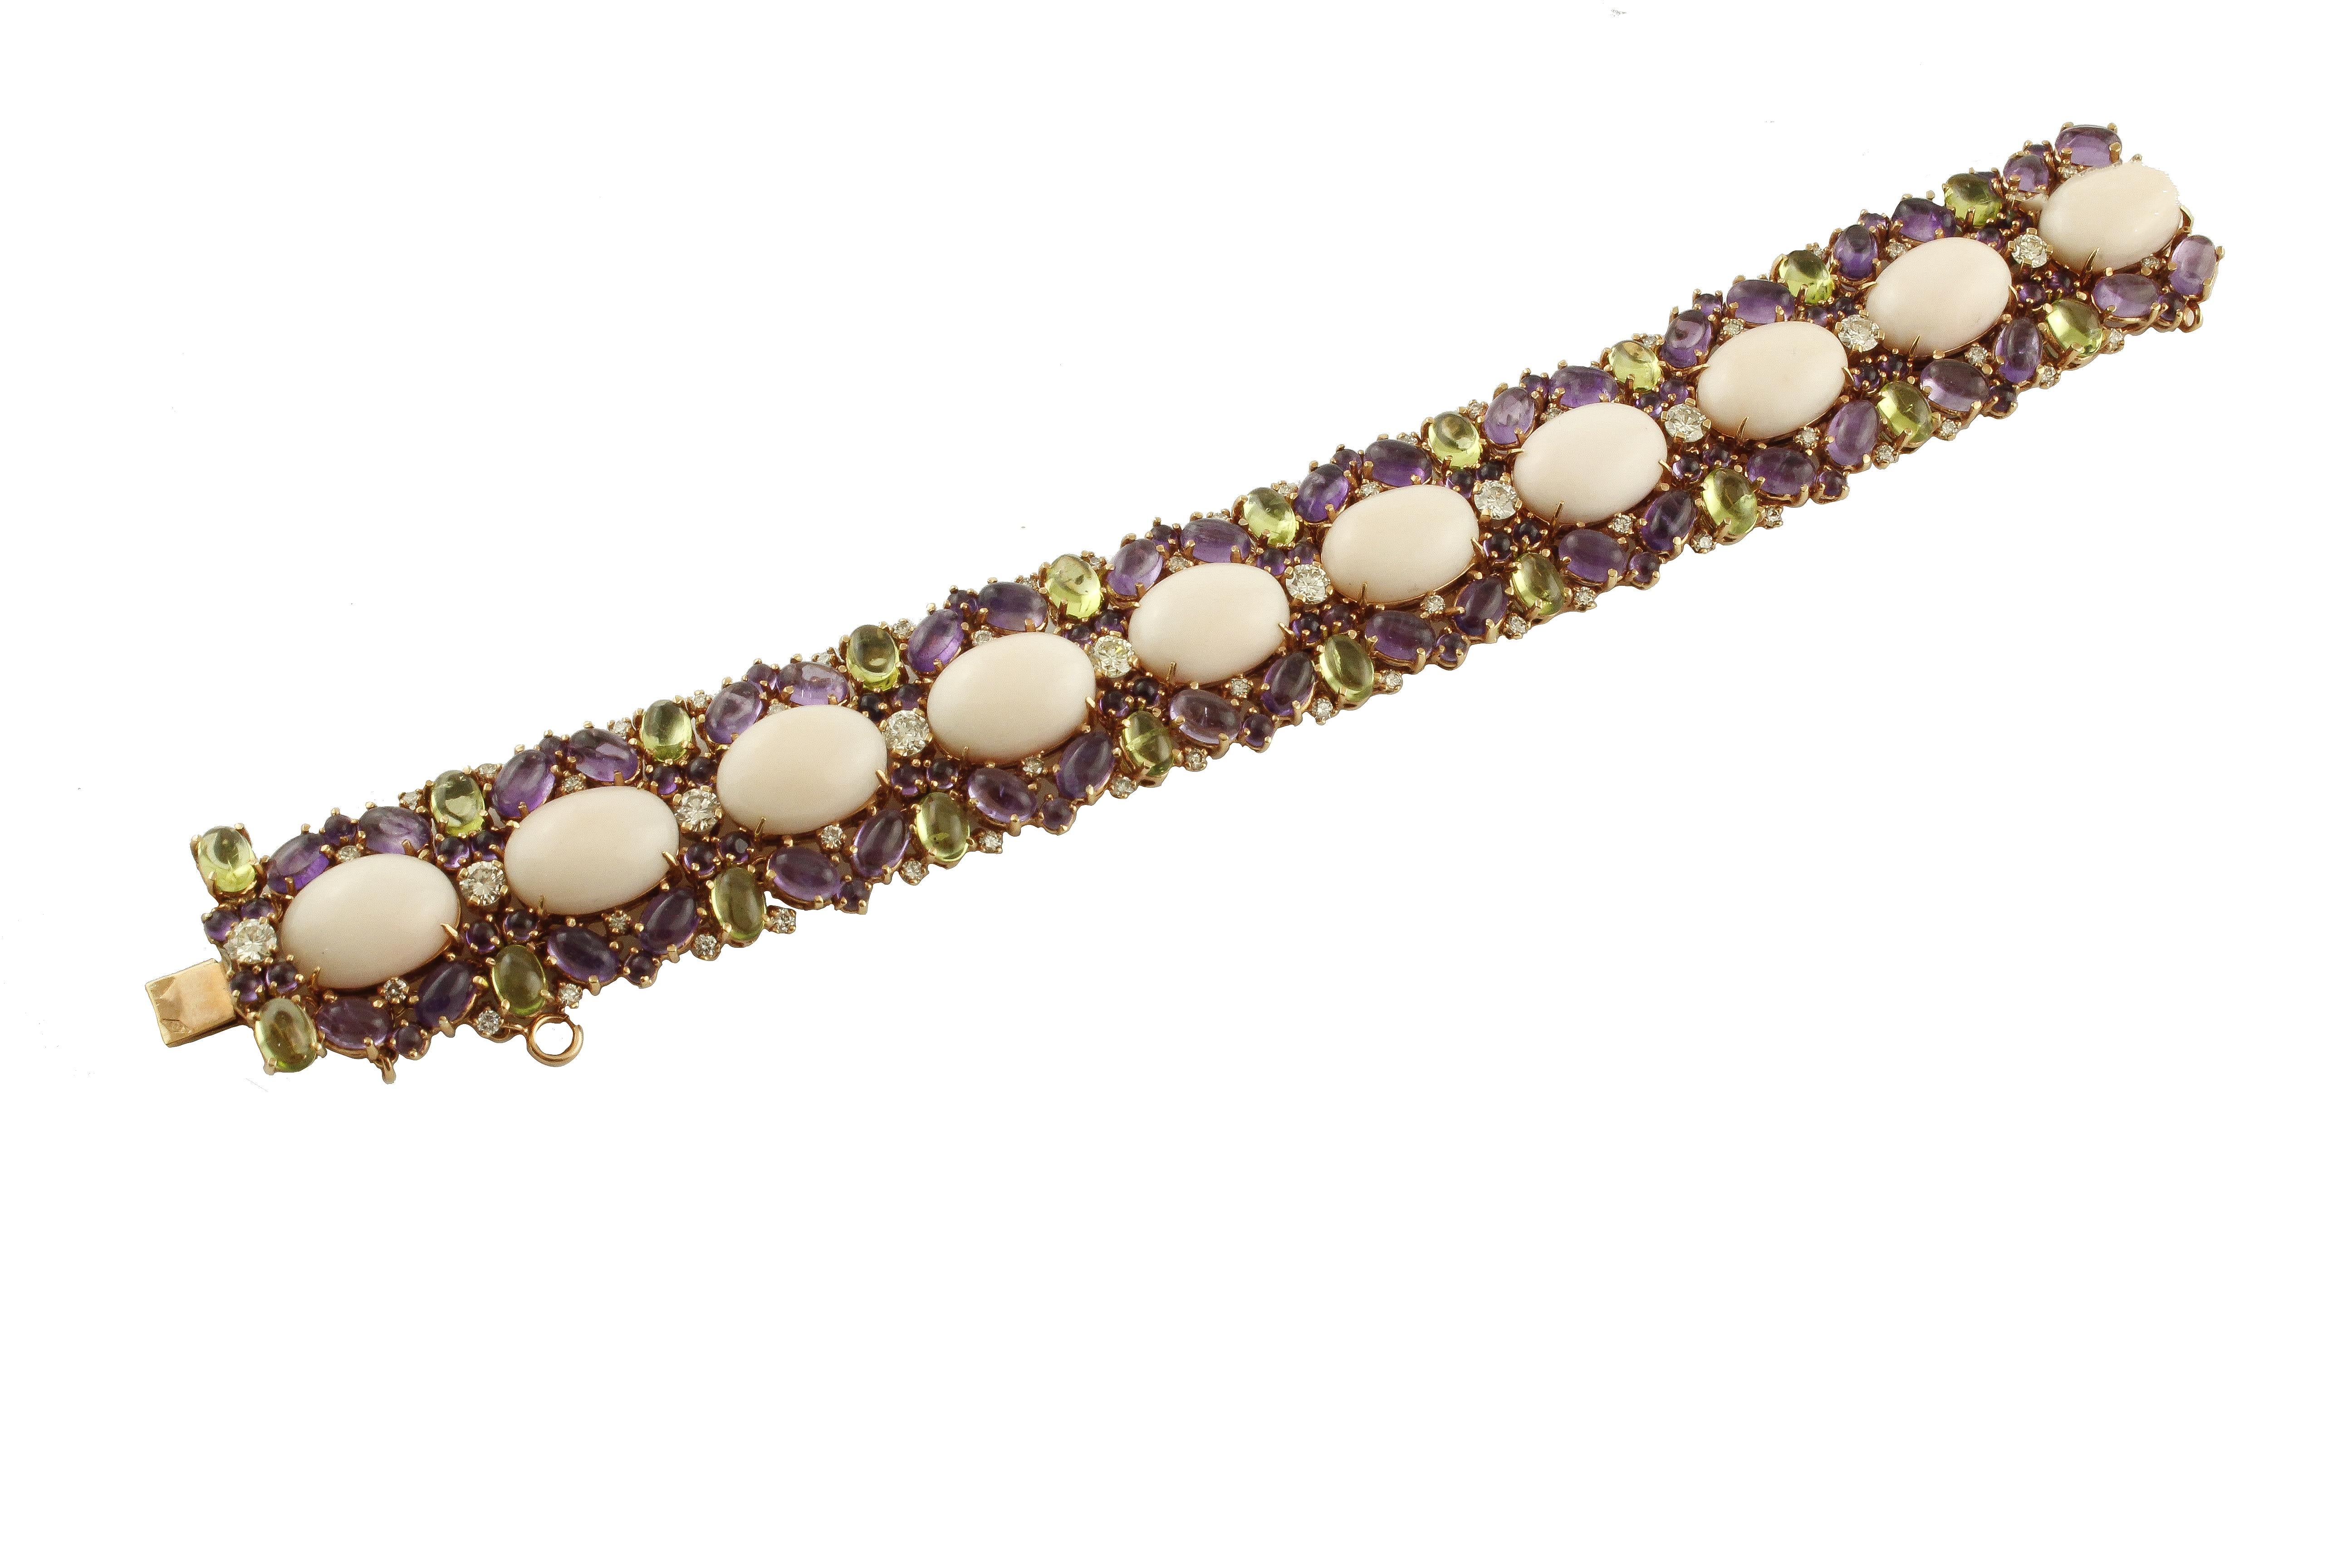 Retro White Diamonds Amethysts Peridots Pink Corals Rose Gold Link Bracelet For Sale